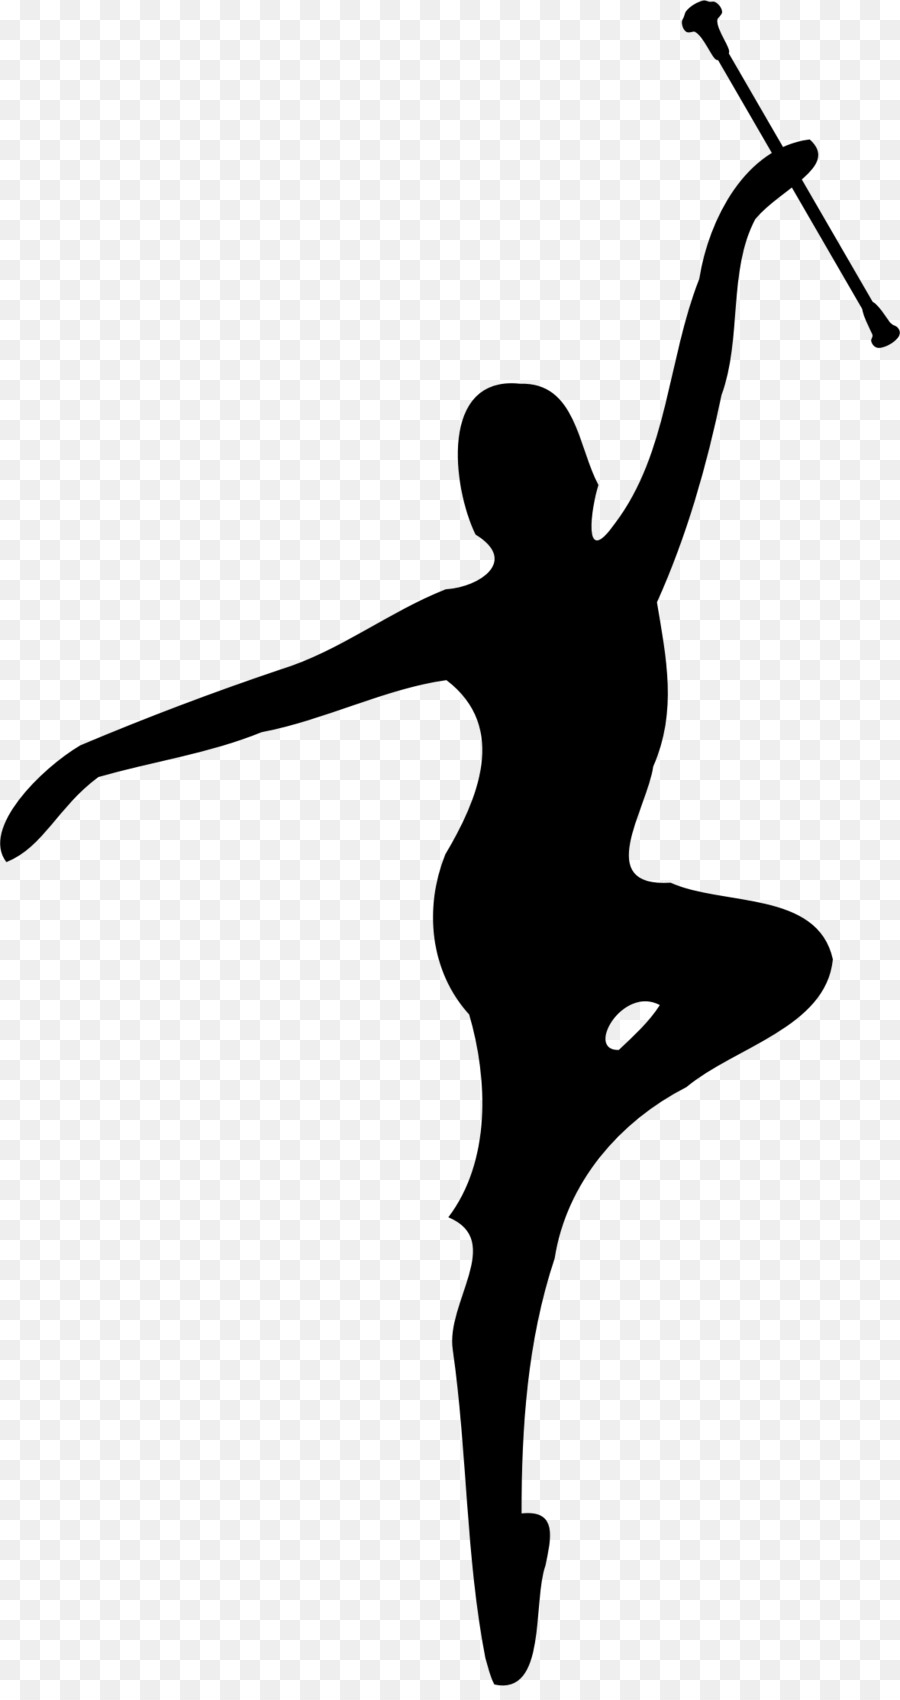 Baton twirling Majorette Silhouette Dance - Silhouette png download - 1179*2209 - Free Transparent Baton Twirling png Download.